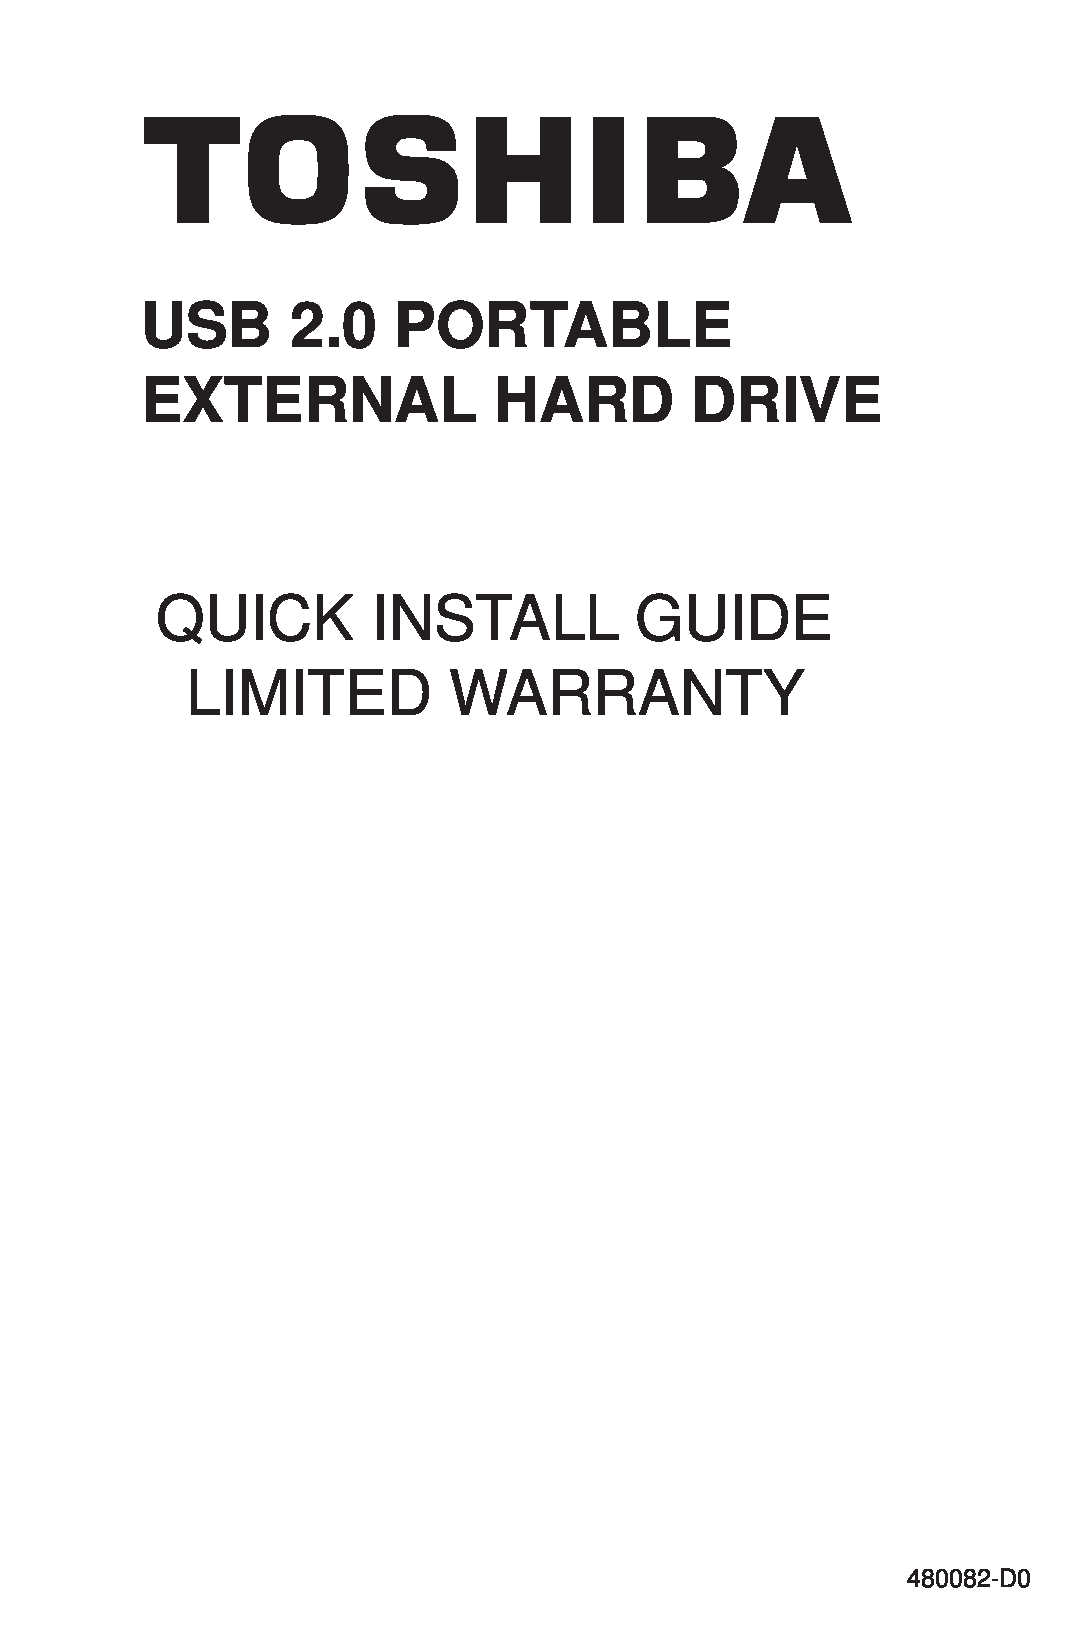 Toshiba 480082-D0 warranty USB 2.0 PORTABLE EXTERNAL HARD DRIVE, Quick Install Guide Limited Warranty 